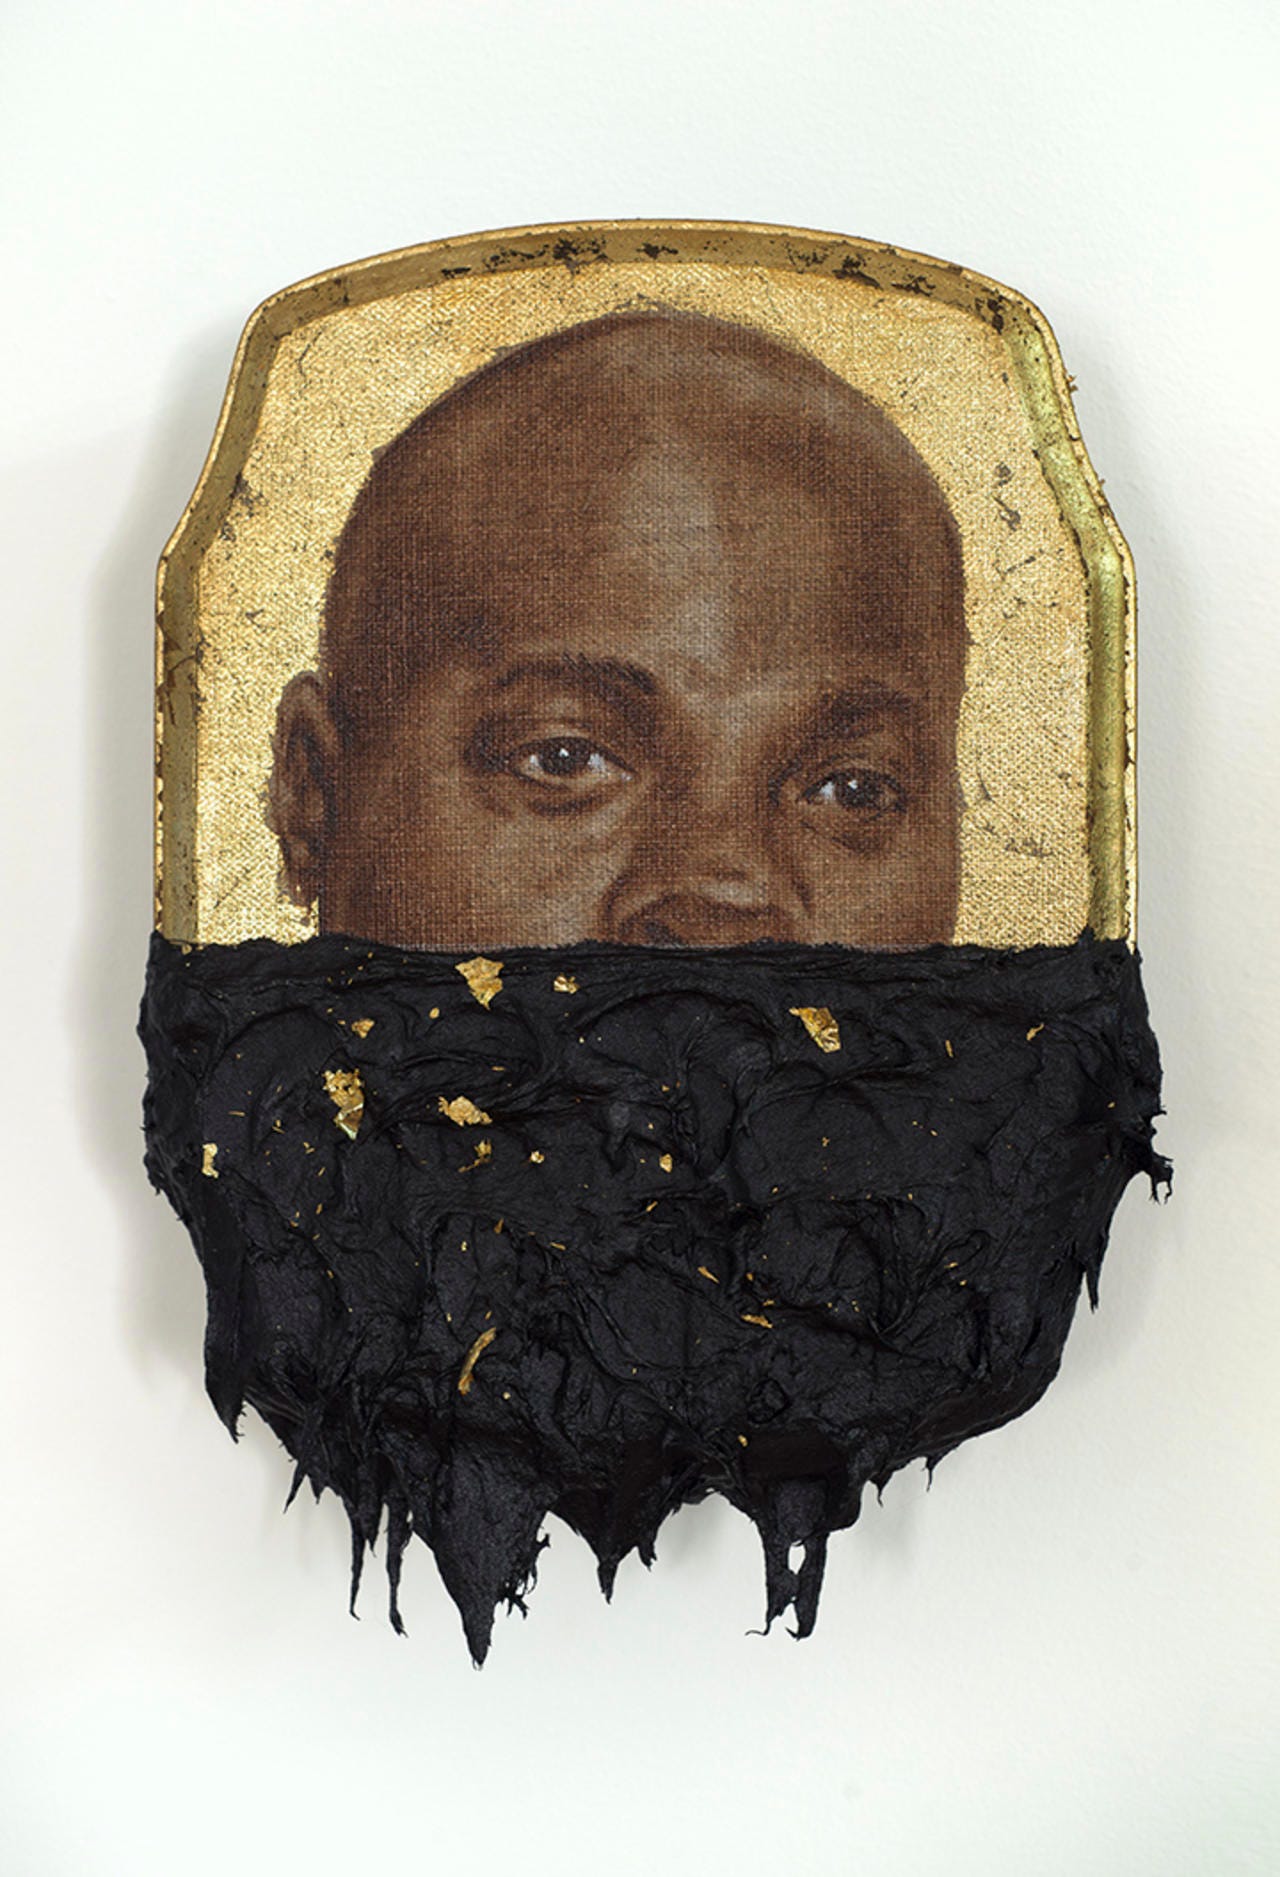 Titus Kaphar; "Jerome IV," 2014; oil, gold leaf and tar on wood panel; ©Titus Kaphar. (Image courtesy of the artist and the Jack Shainman Gallery, New York)